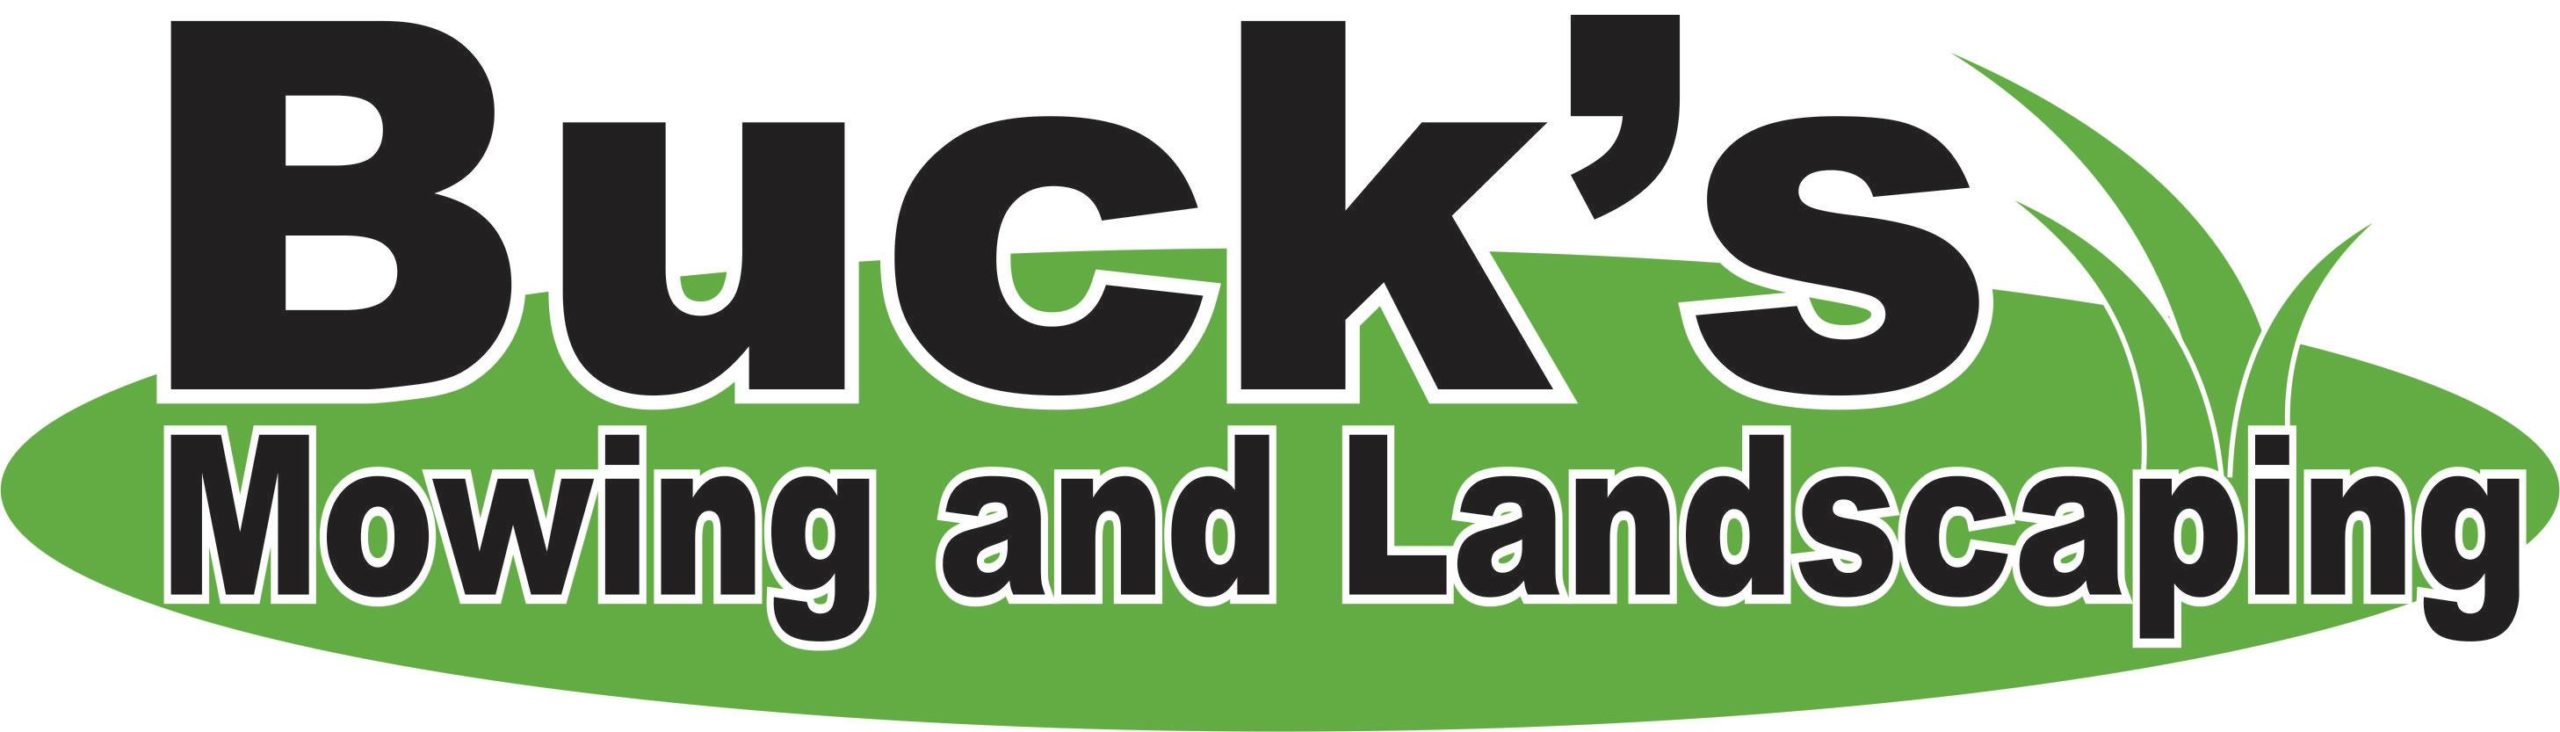 Buck's Mowing & Landscaping